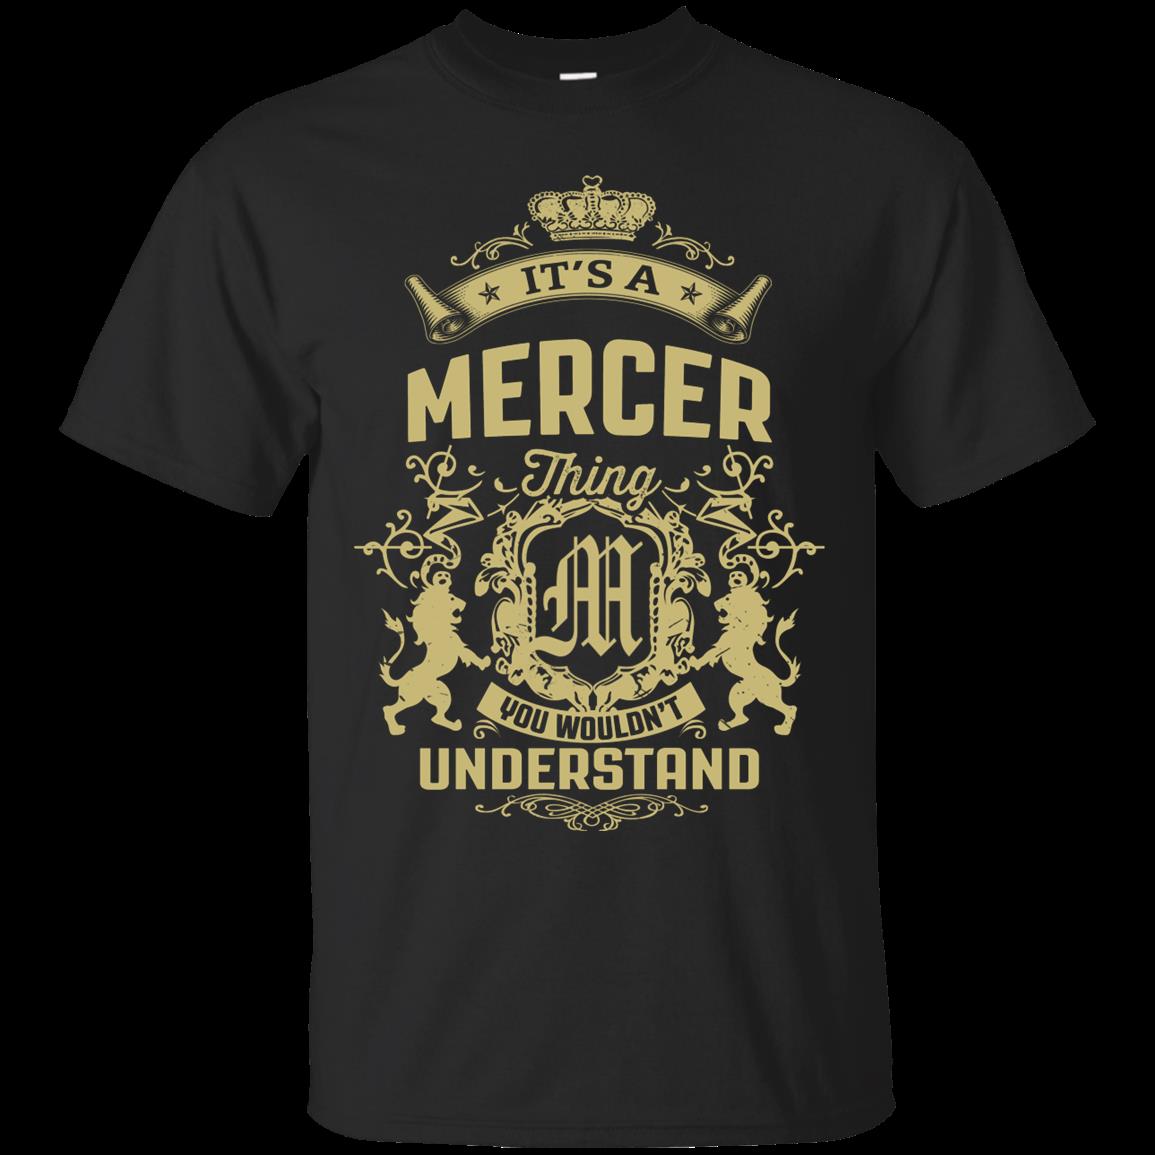 Mercer Shirts It’s A Mercer Thing You Wouldn’t Understand